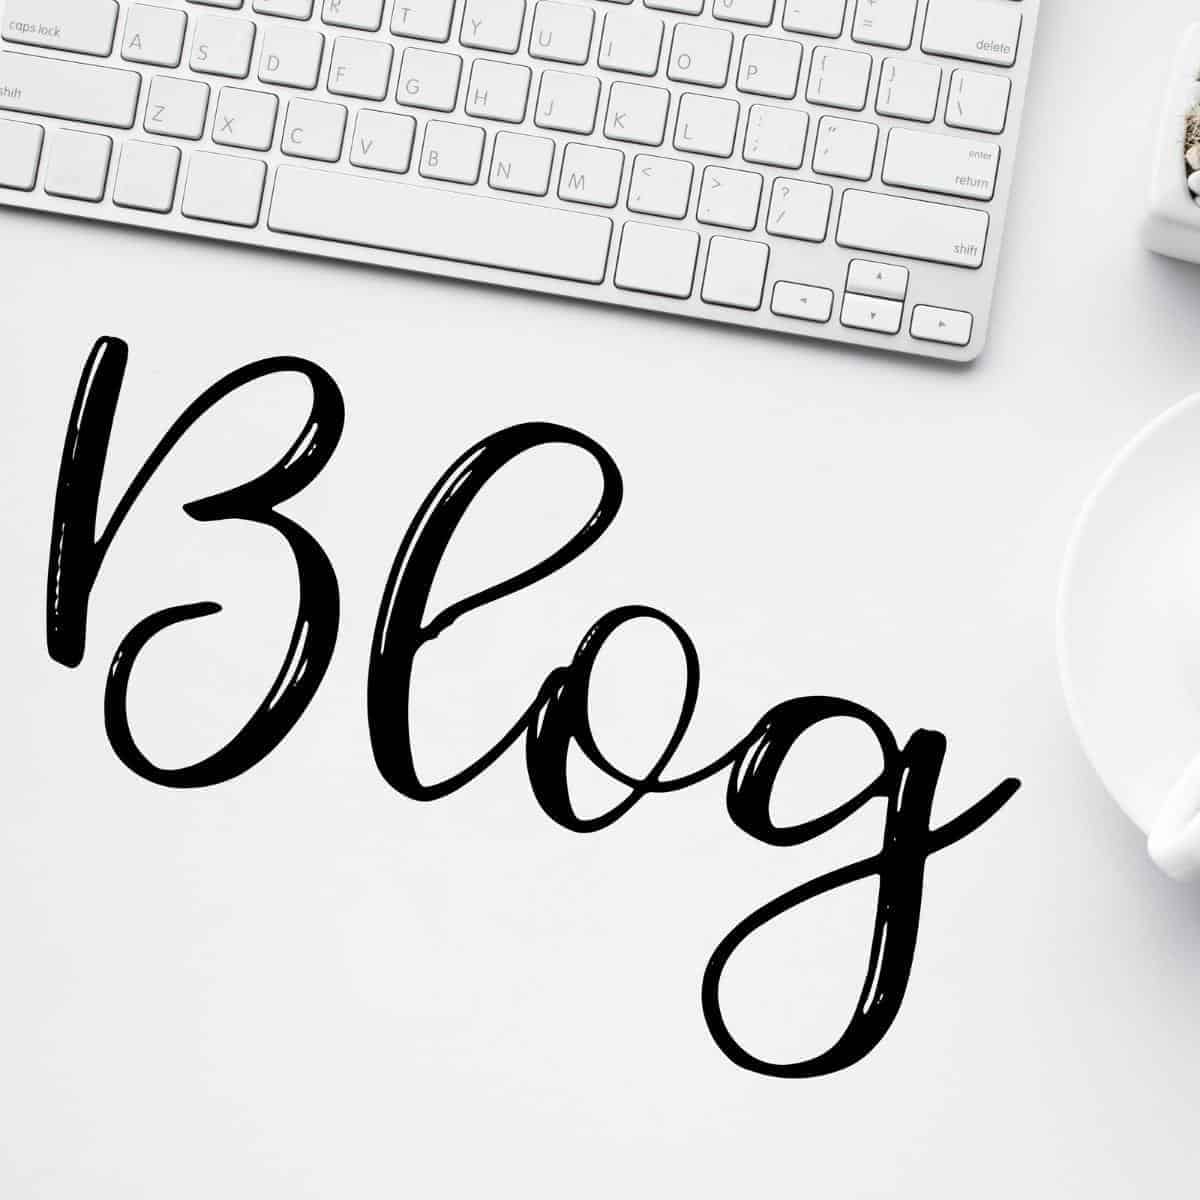 5 Blogging tips no one tells you